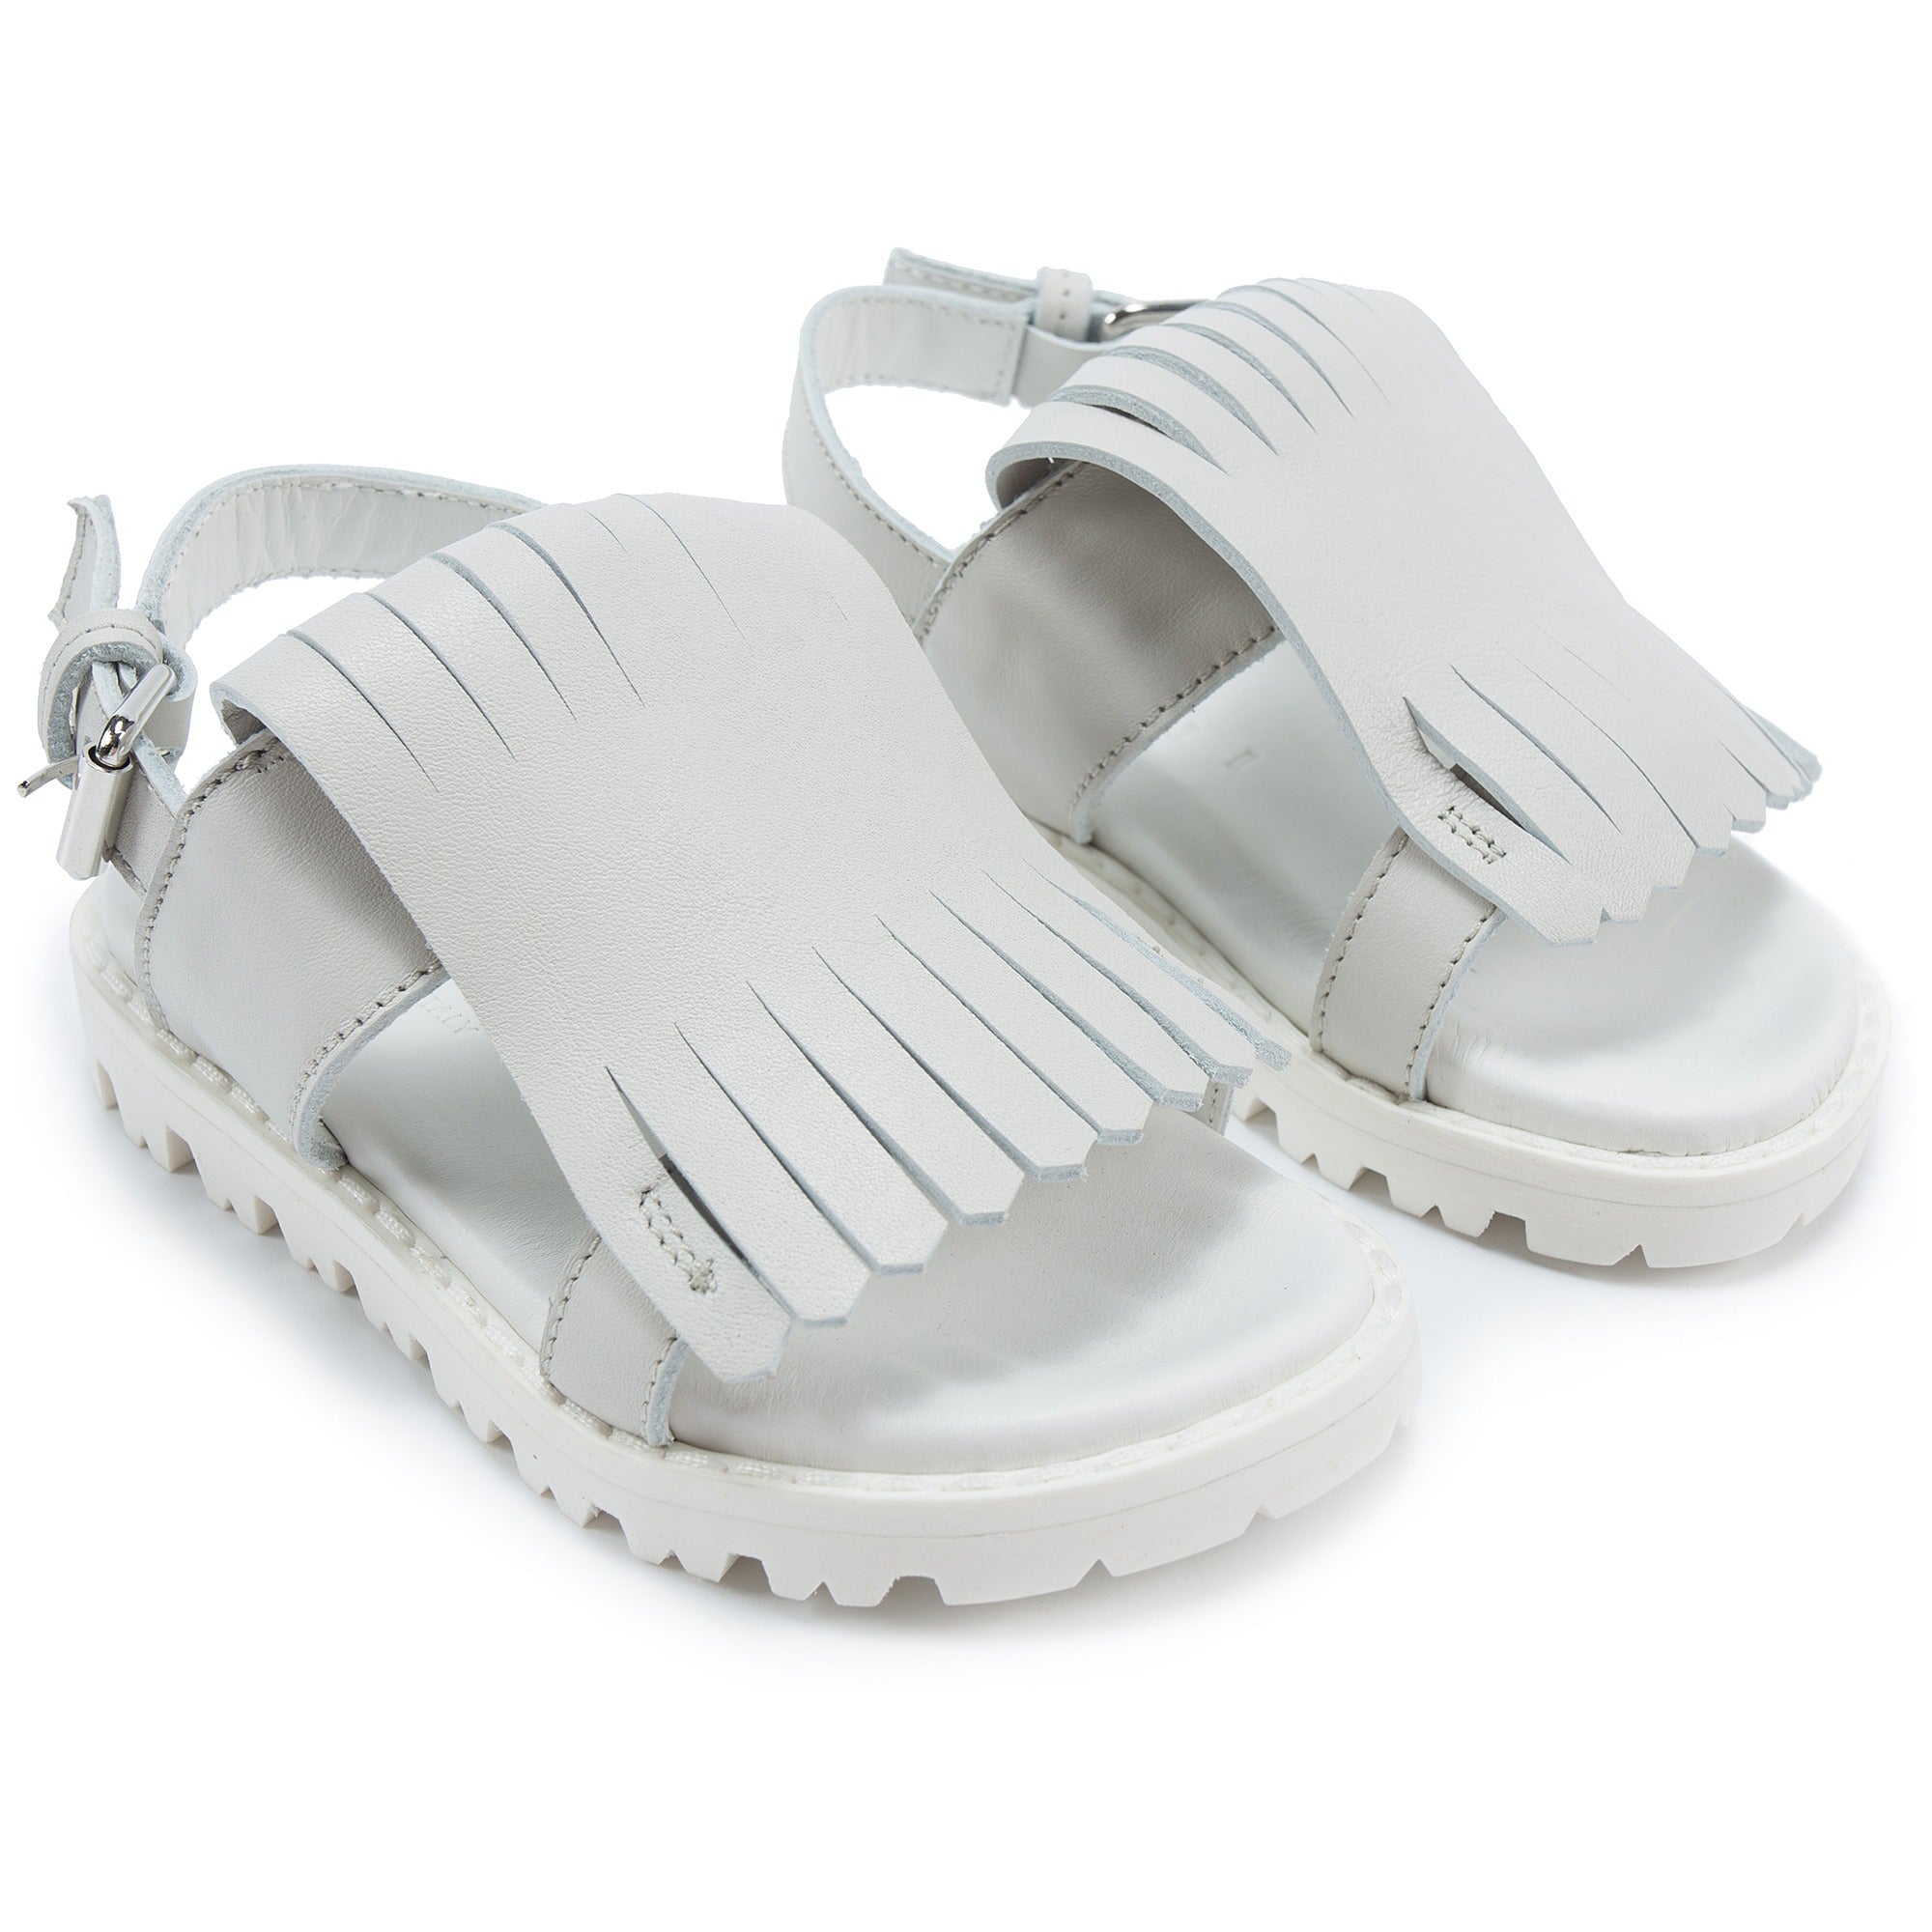 Girls White Leather Sandals